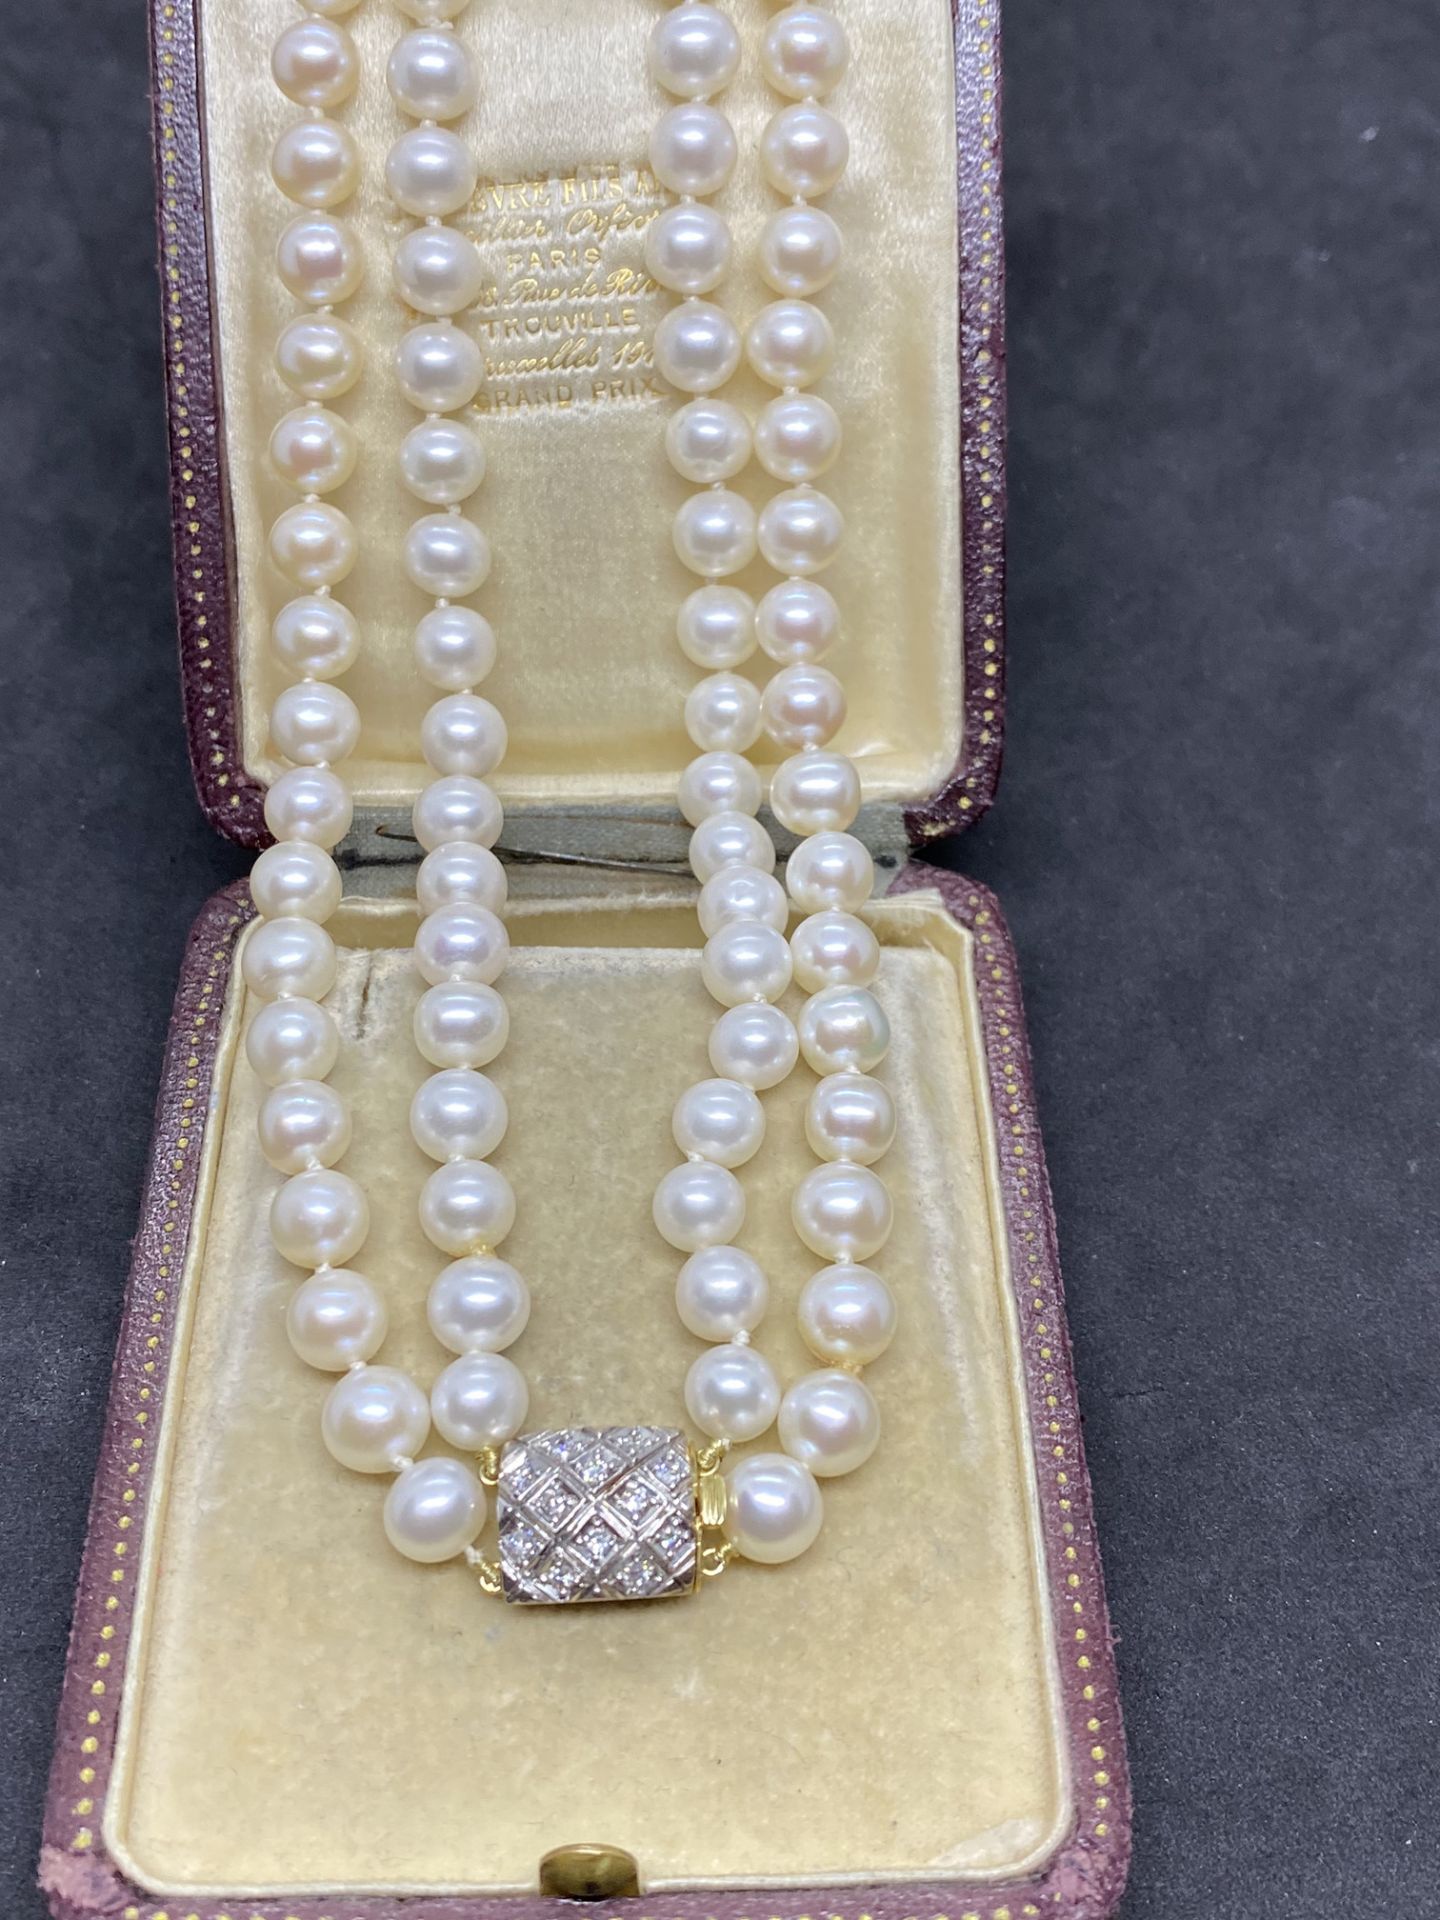 CULTURED PEARL NECKLACE WITH 18ct GOLD CLASP - Image 2 of 6